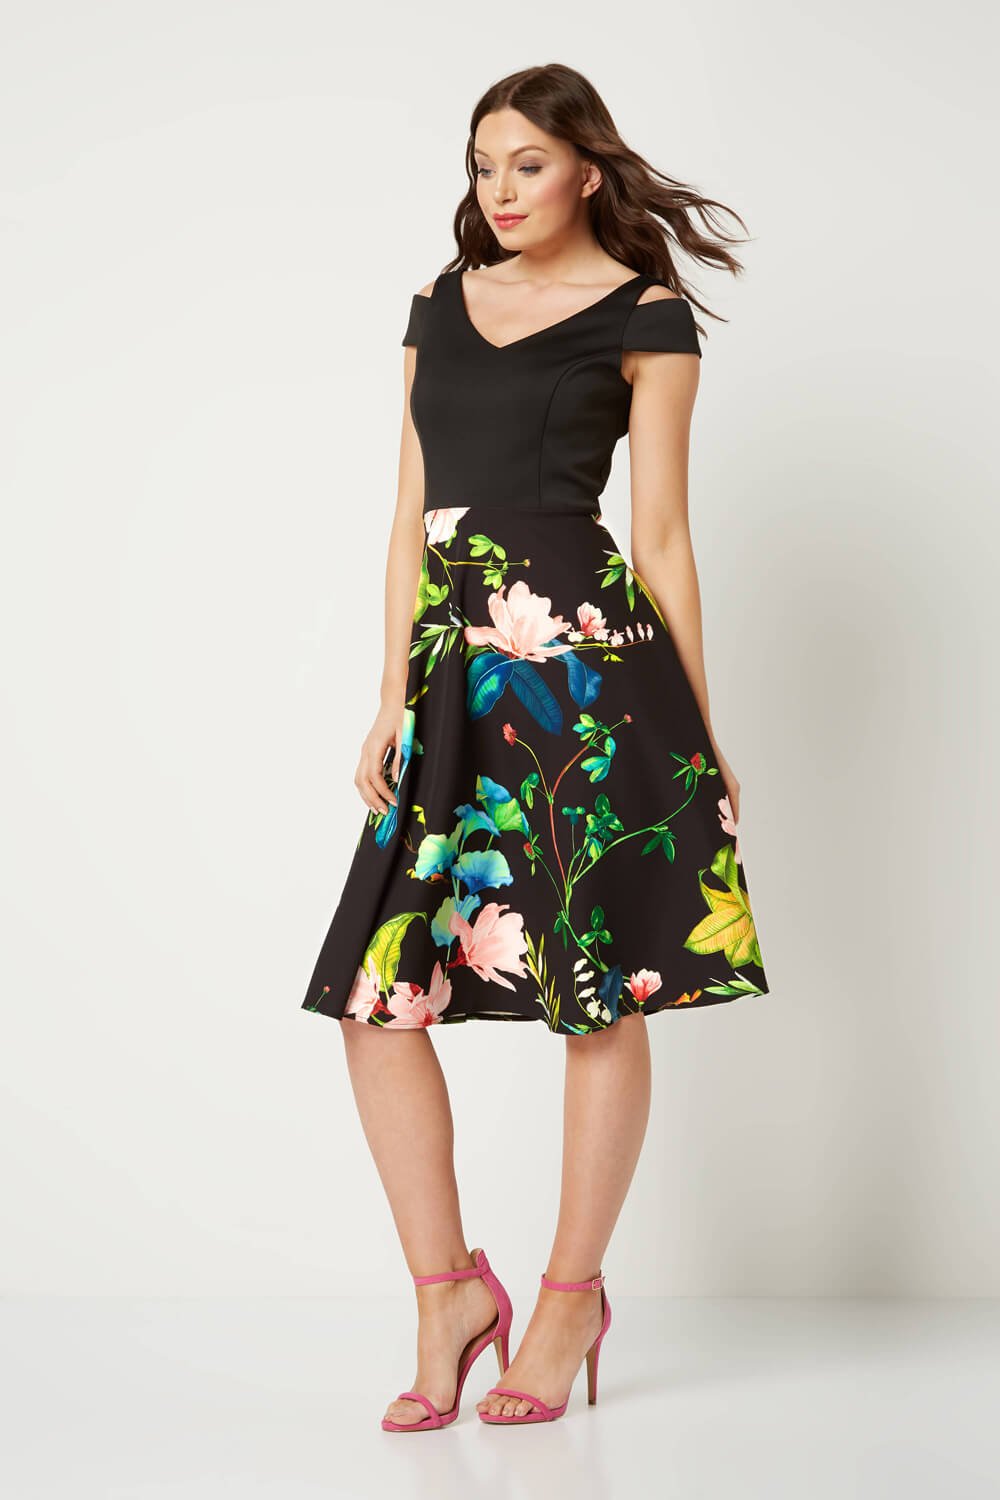 Black Floral Print Fit and Flare Scuba Dress, Image 2 of 4